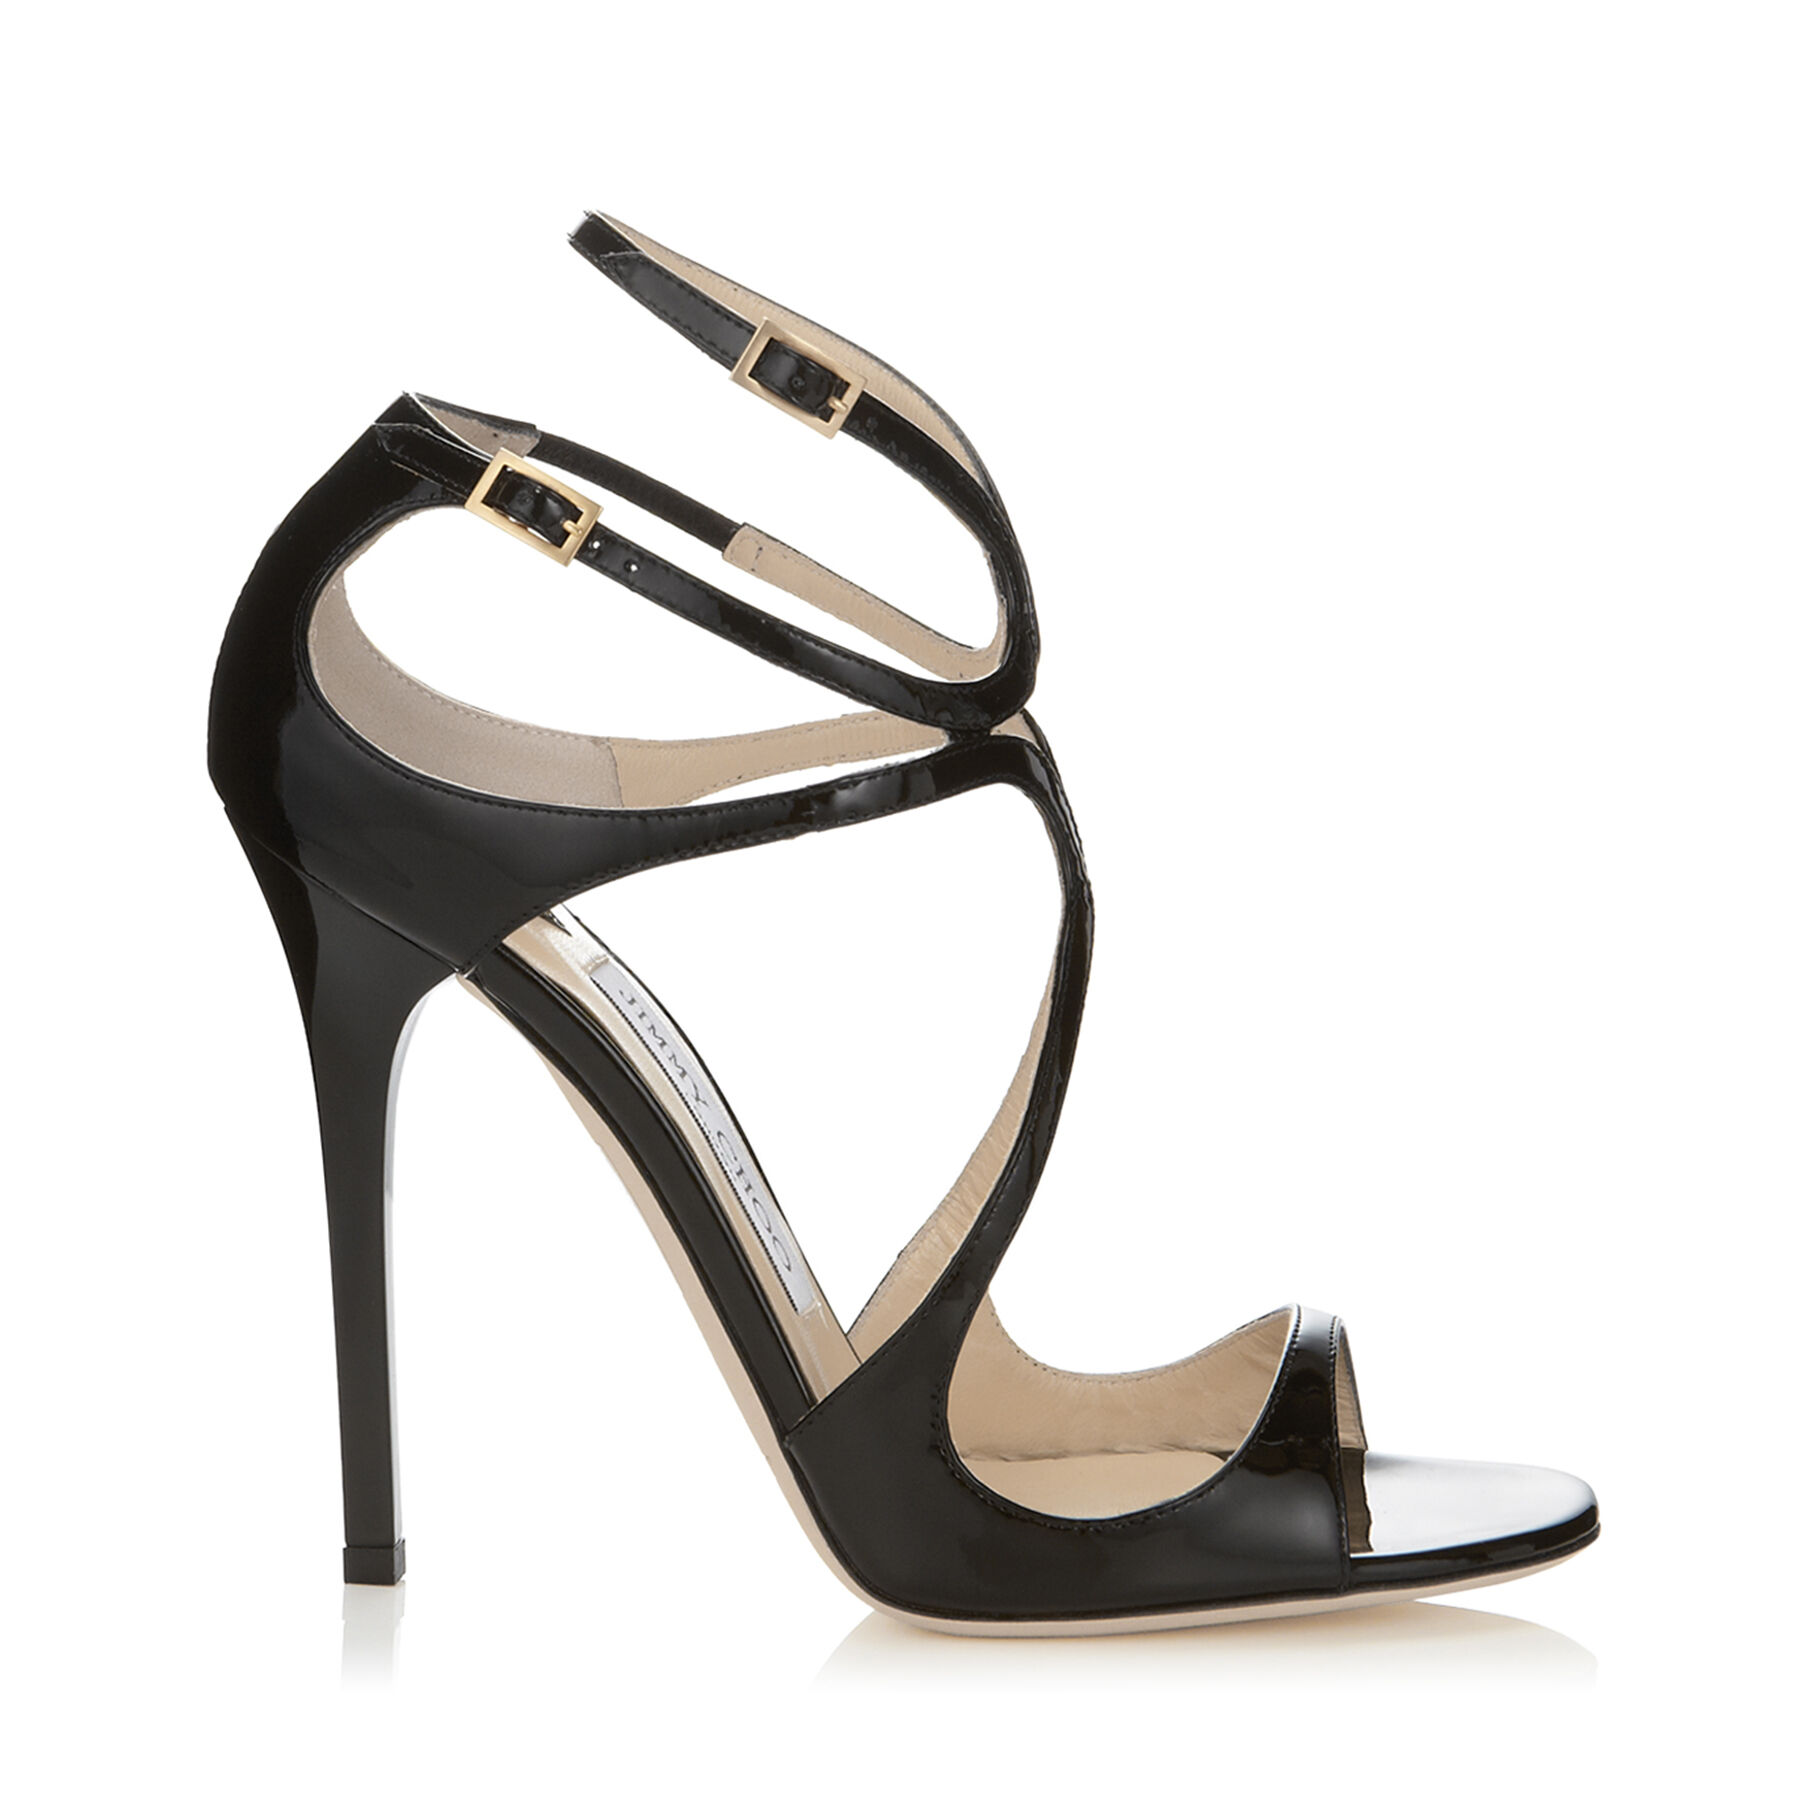 Black Patent Leather Sandals | Strappy Sandals | Lance | JIMMY CHOO